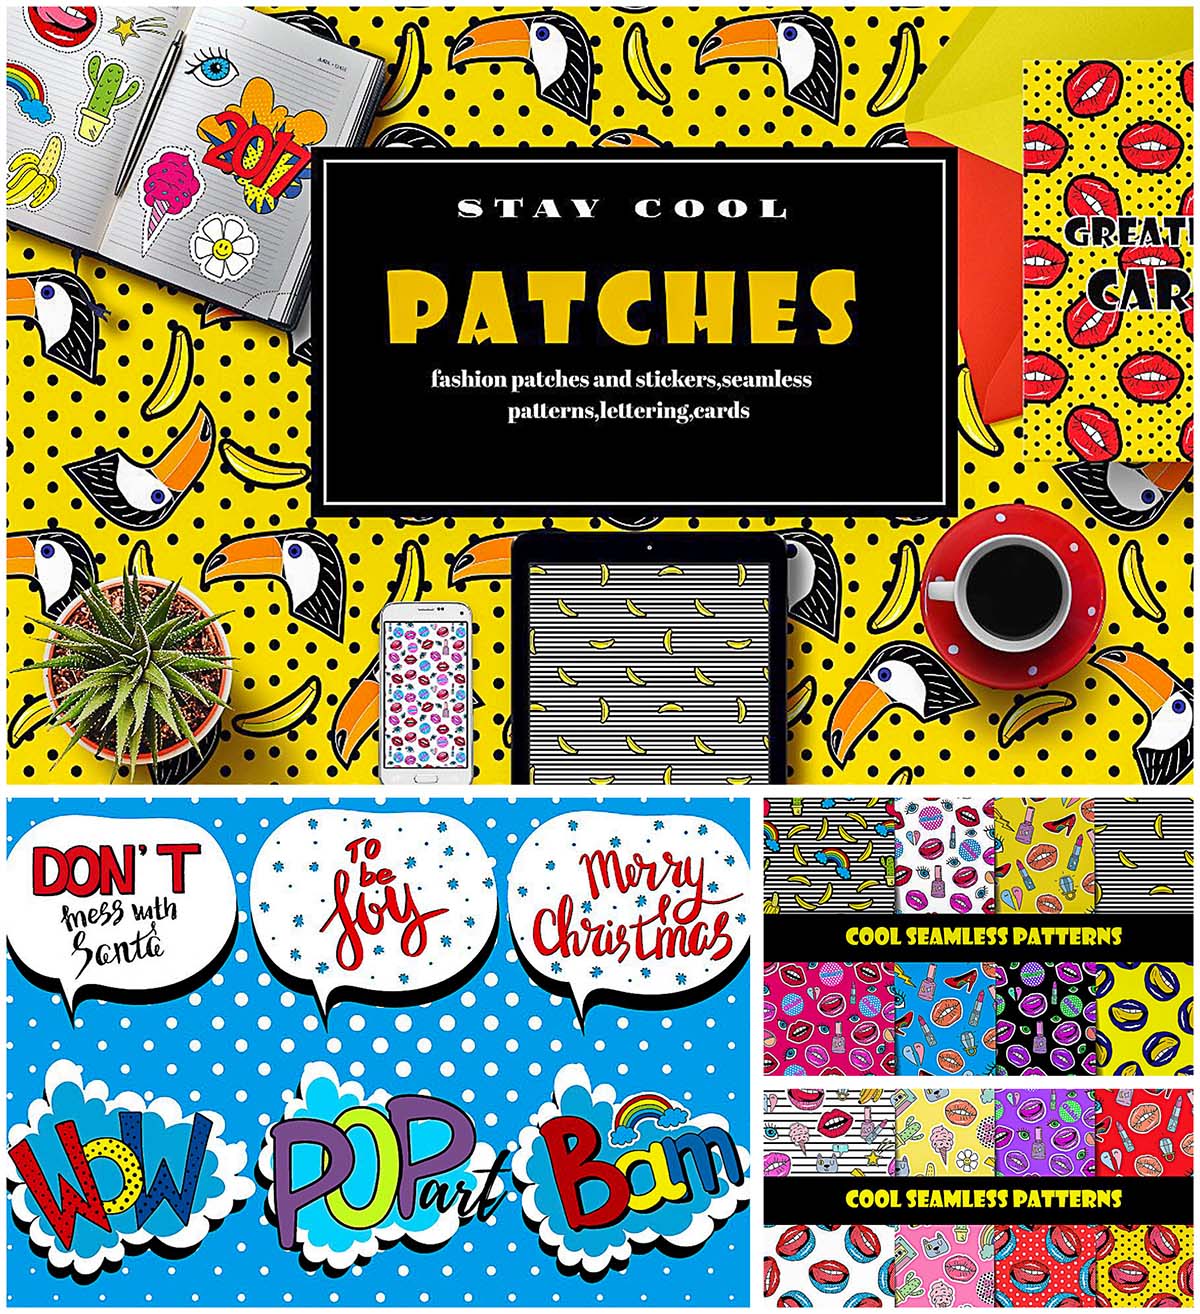 Fashion patches and stickers